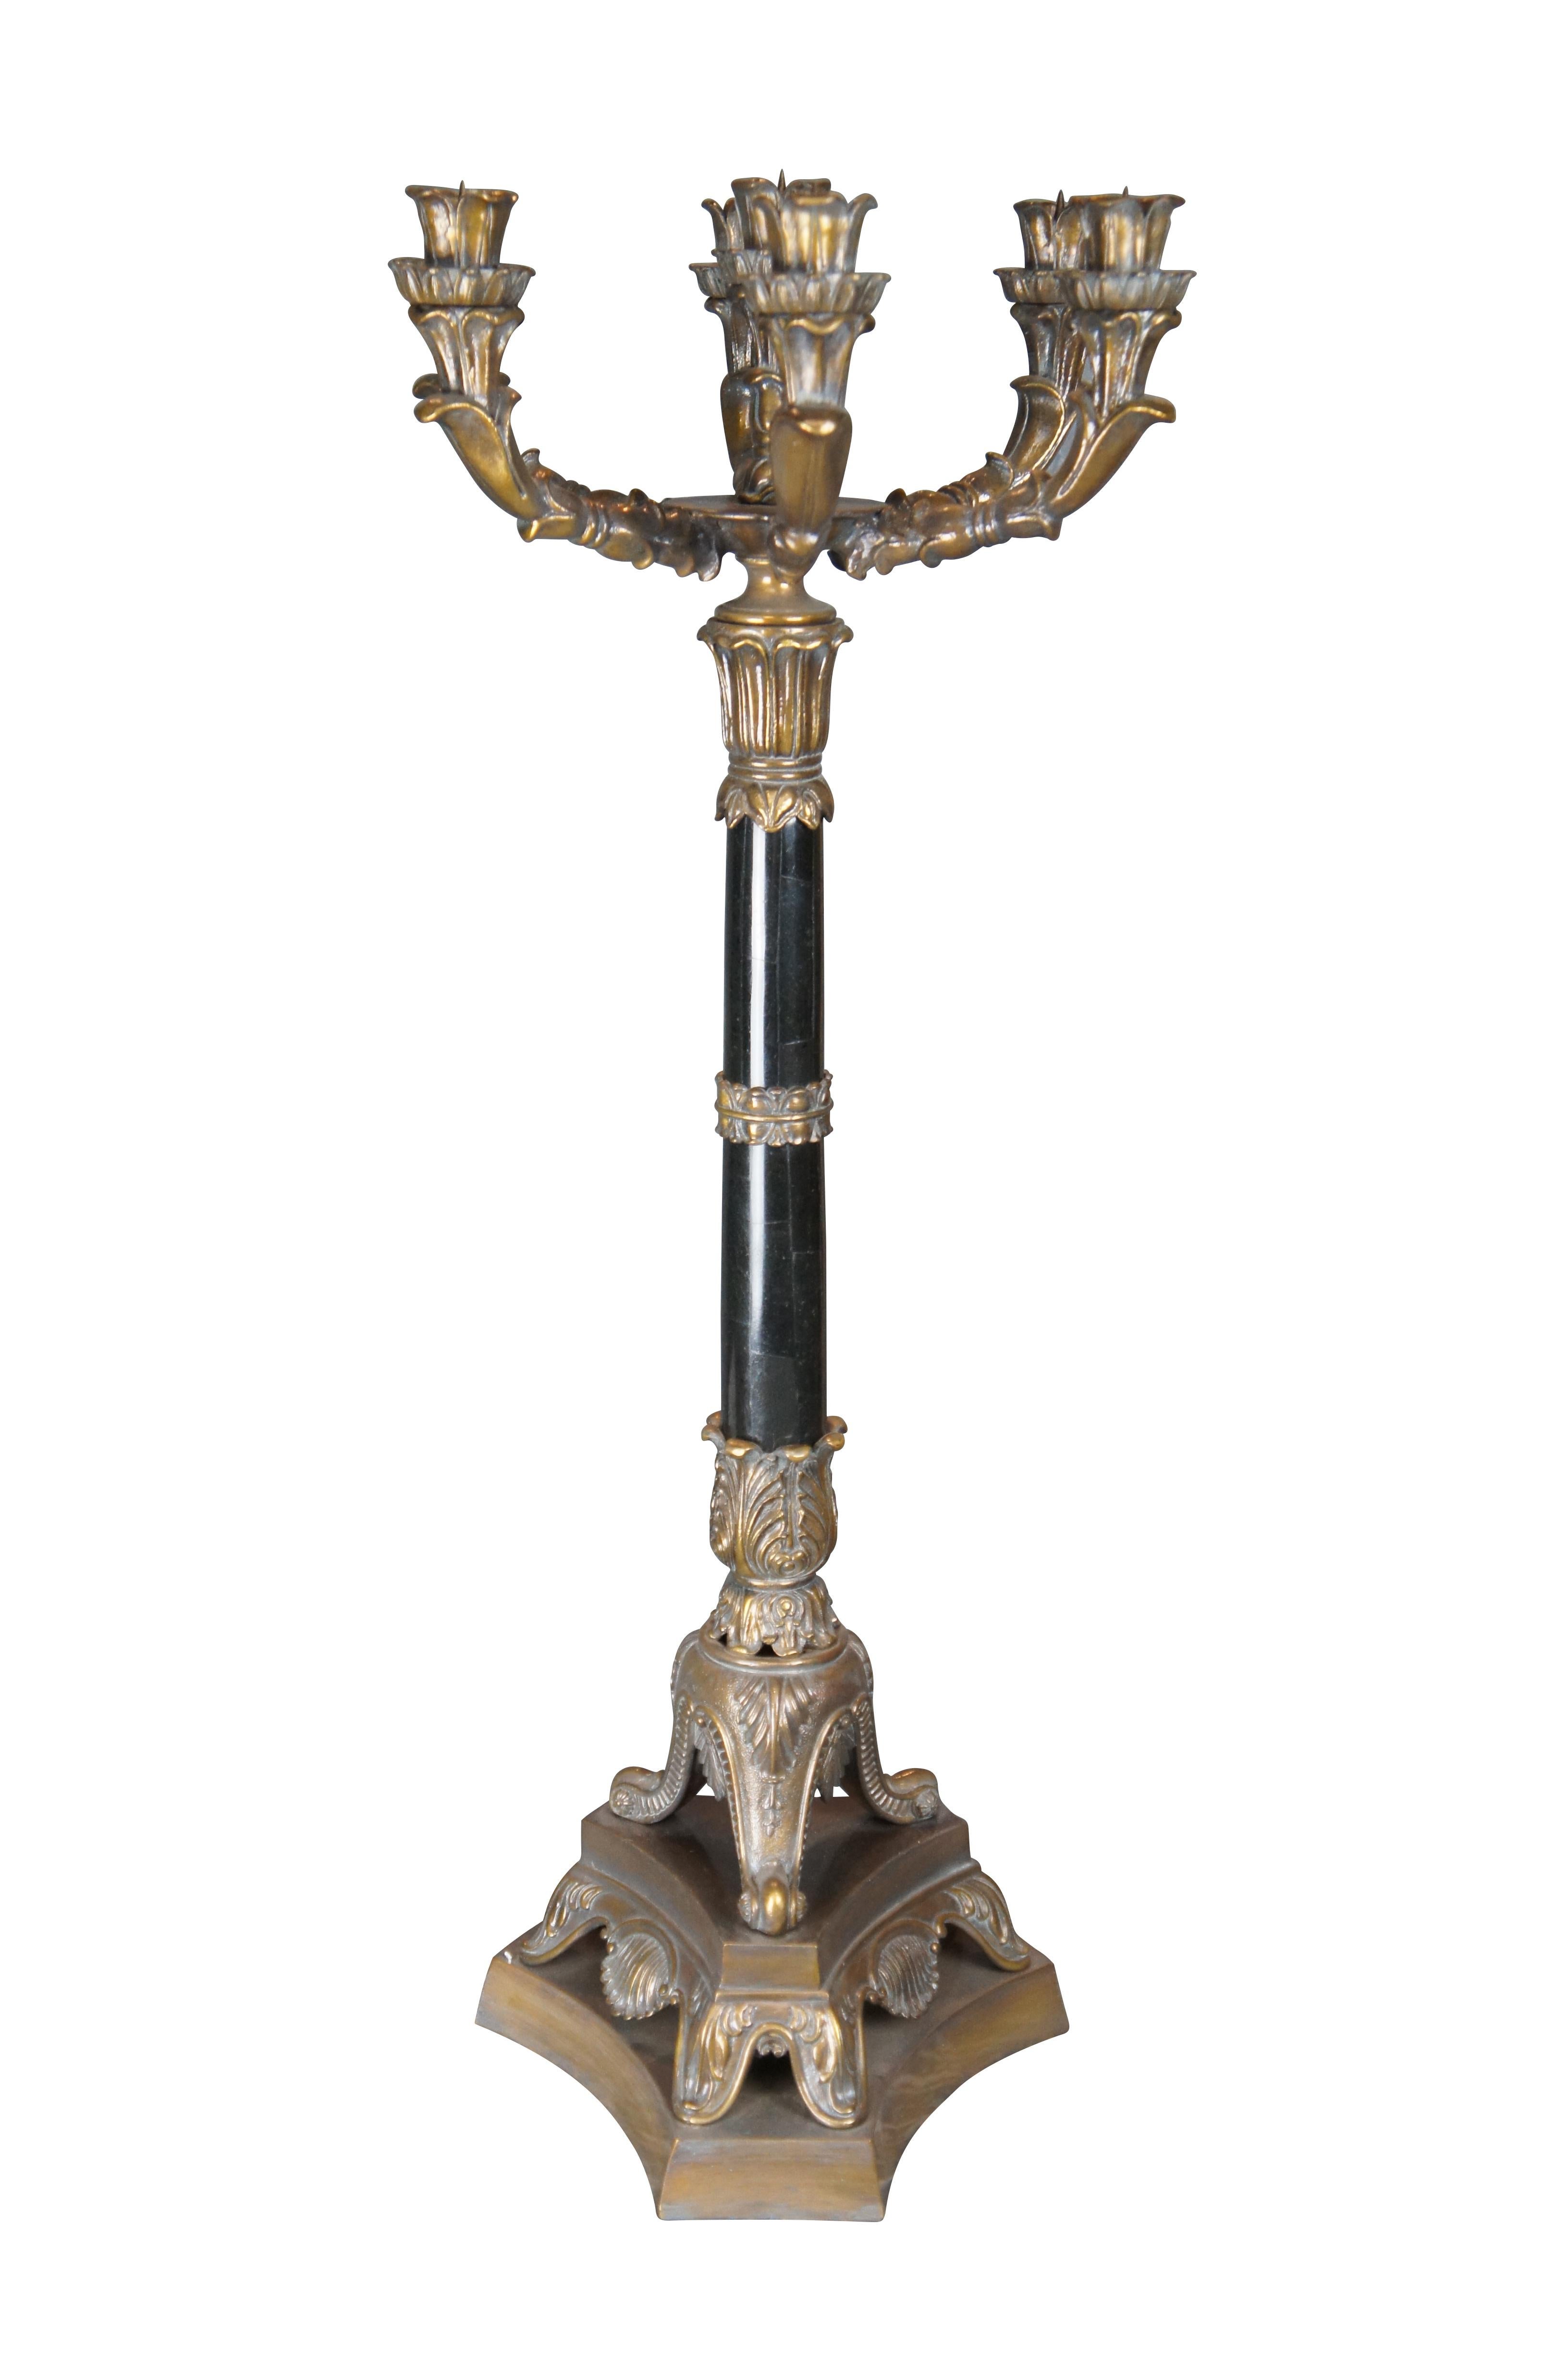 French Provincial 2 Maitland Smith French Marble & Bronze Candlesticks Candelabras Candle Holders For Sale